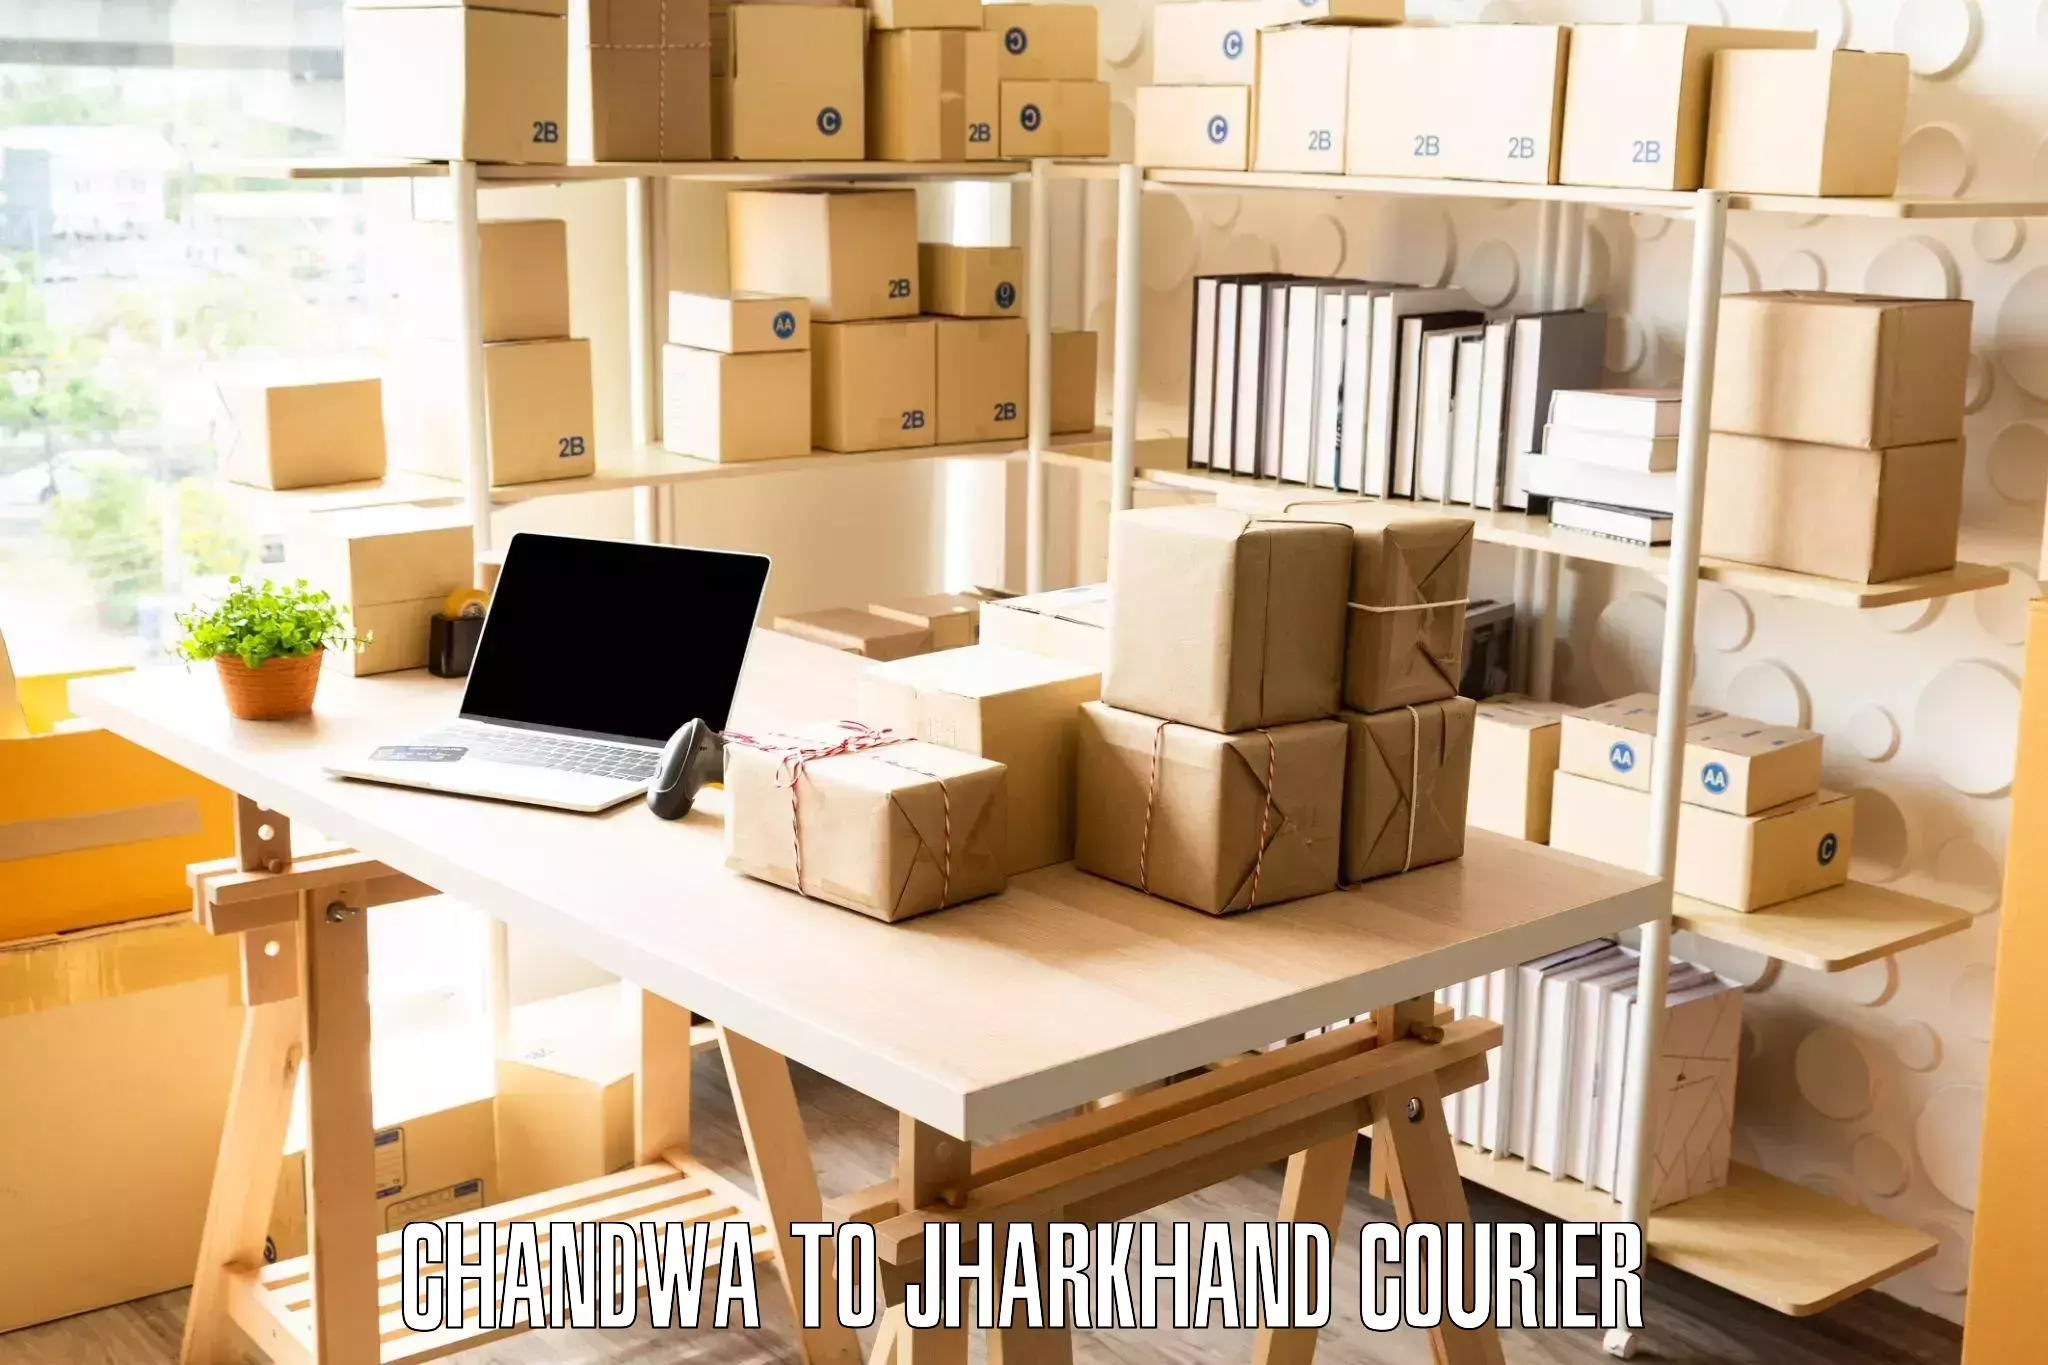 Personalized furniture moving in Chandwa to Jharkhand